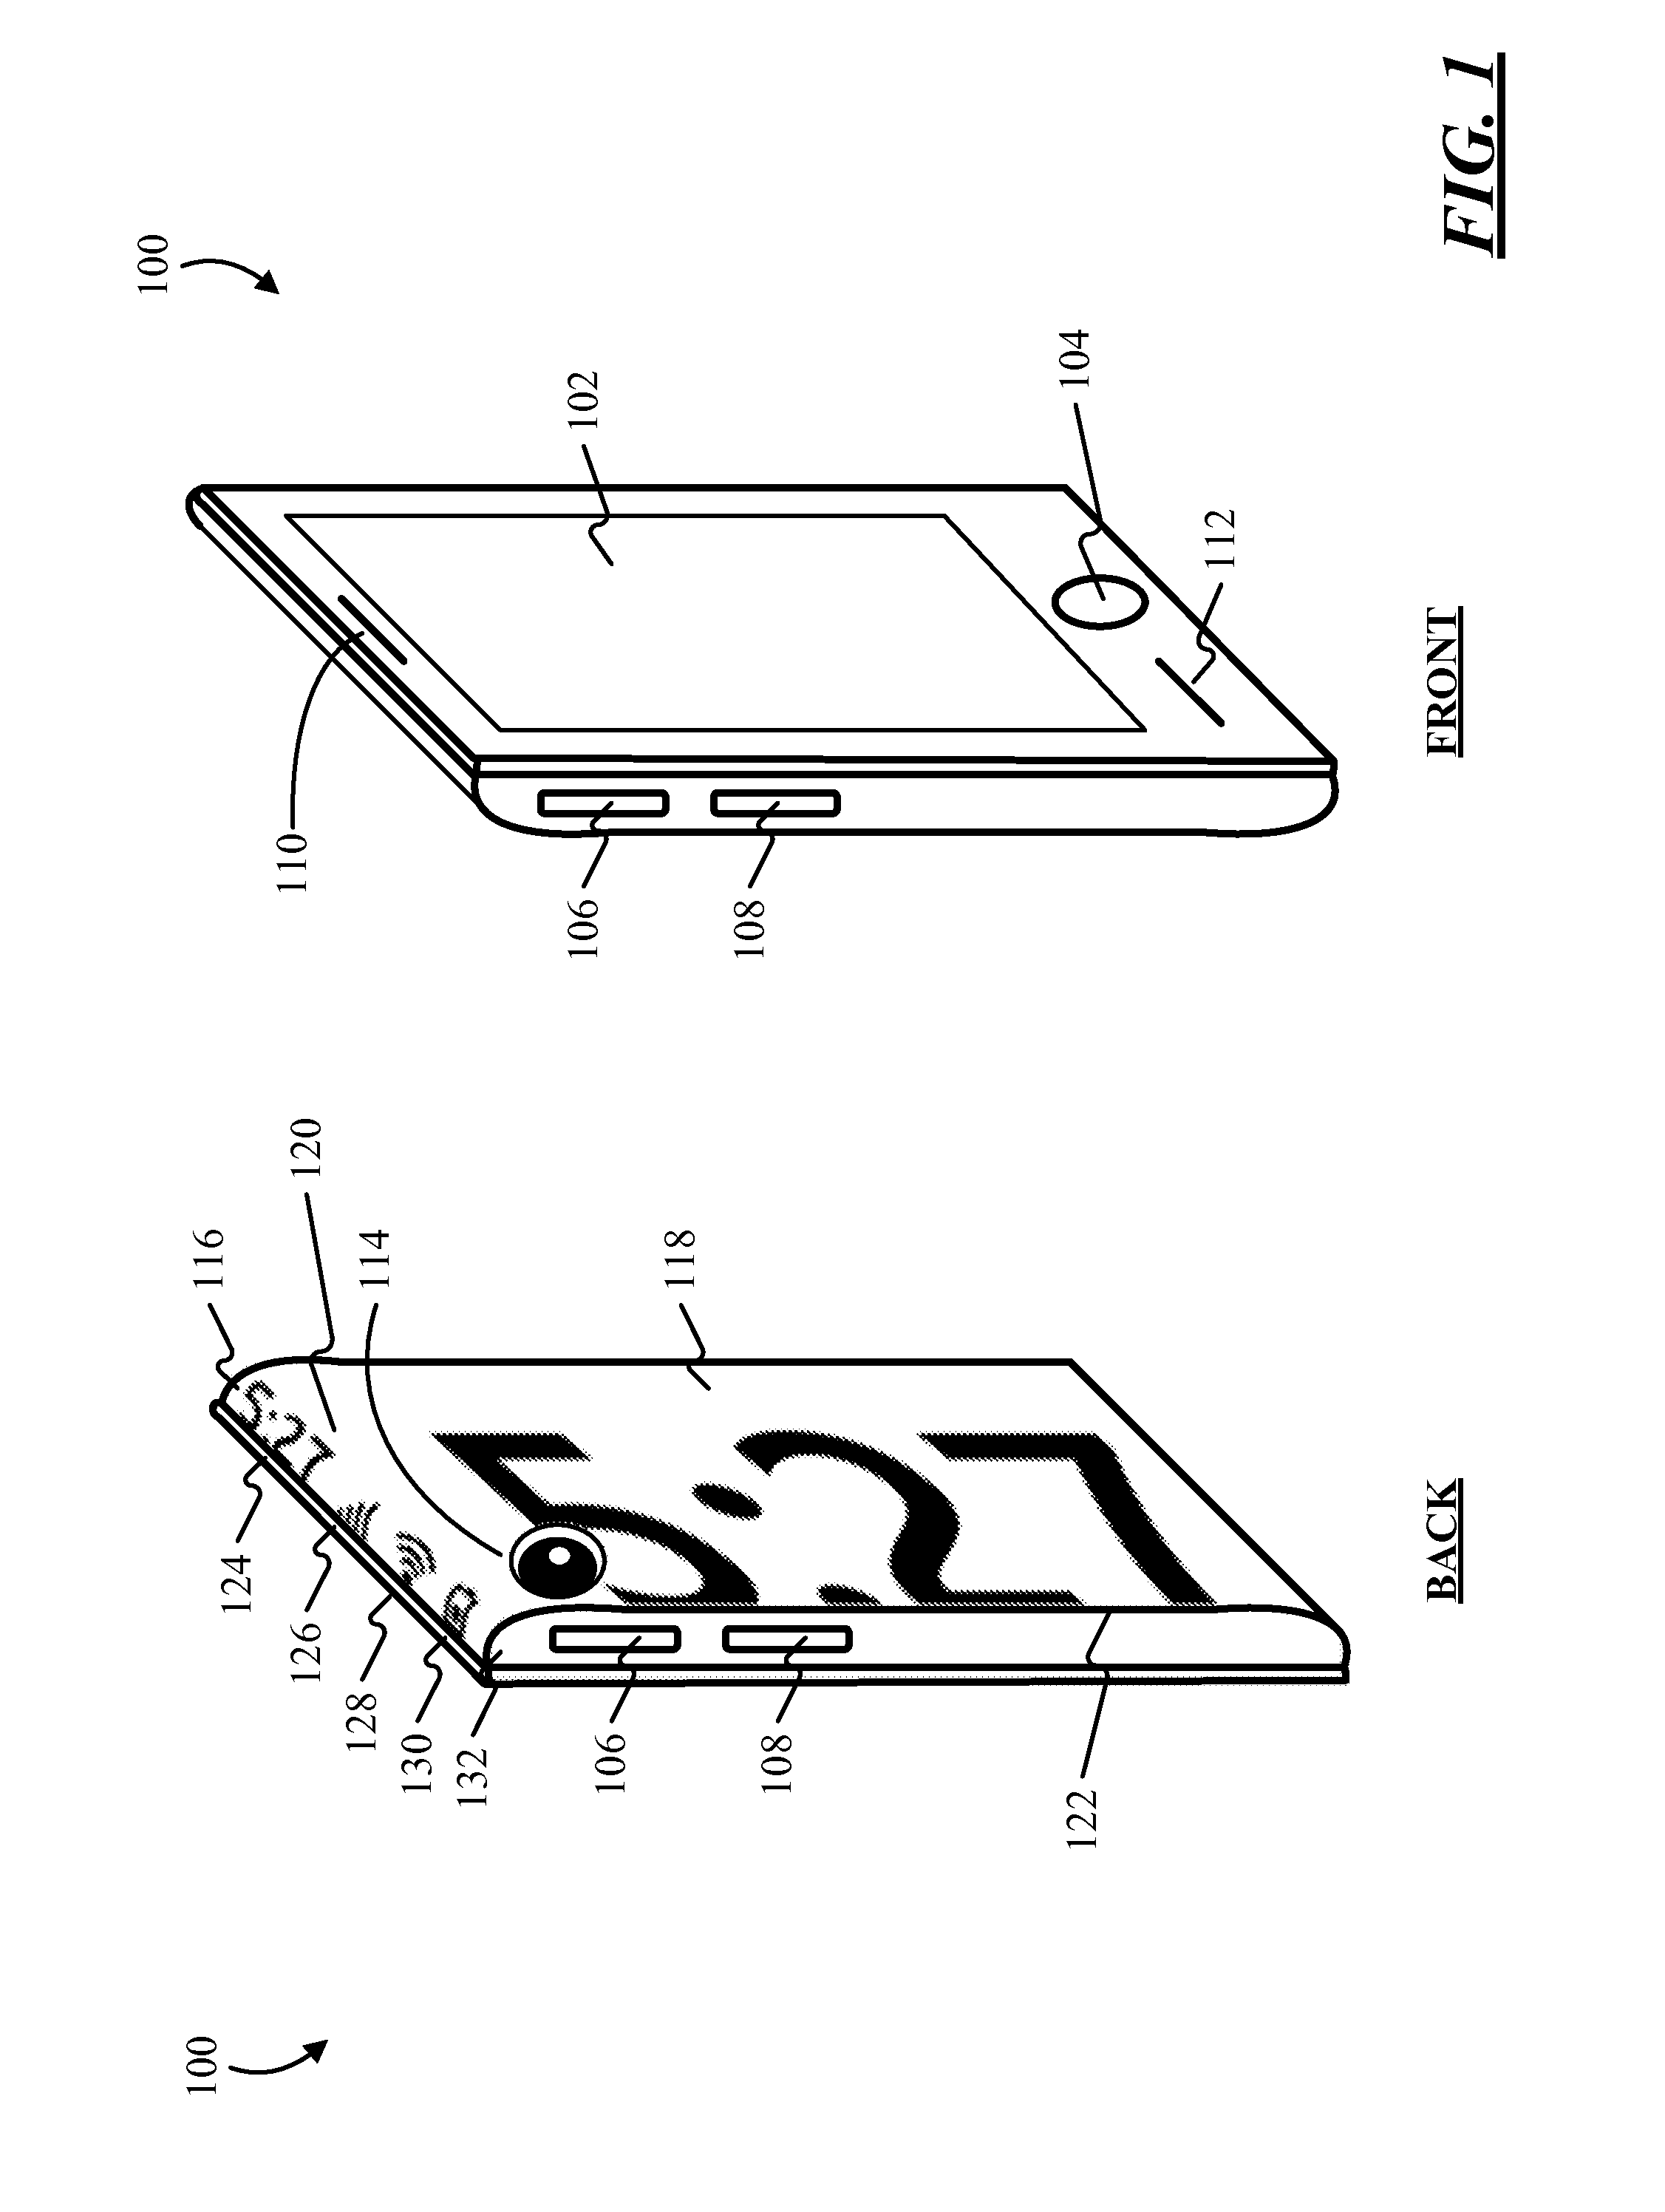 Use of low-power display on device